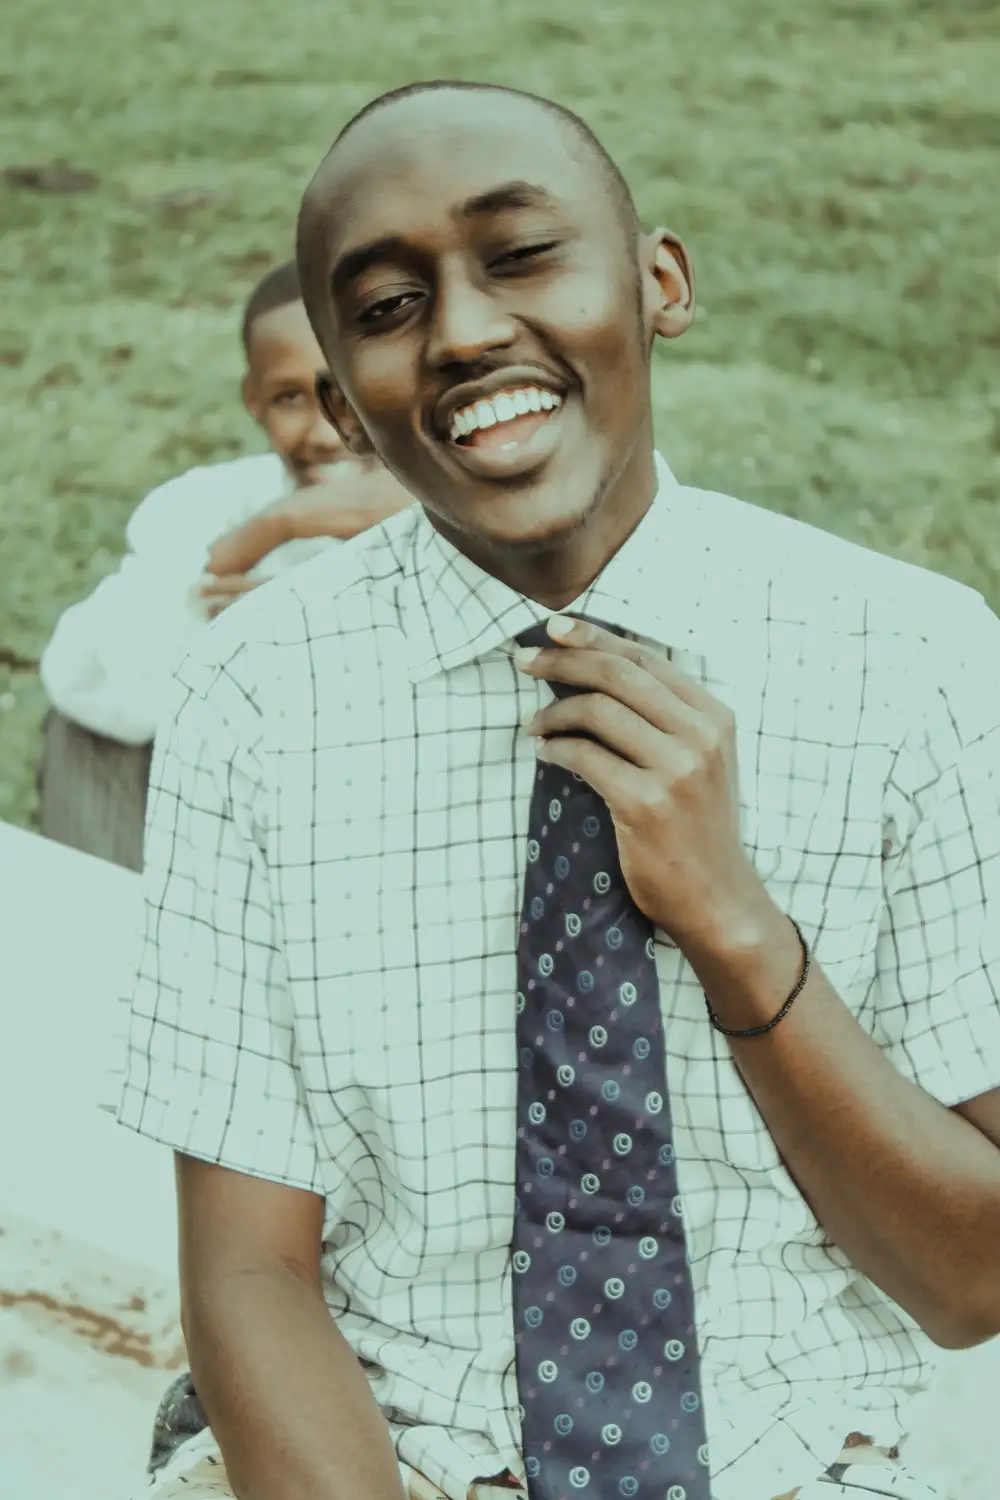 Smiling man on tie with friend